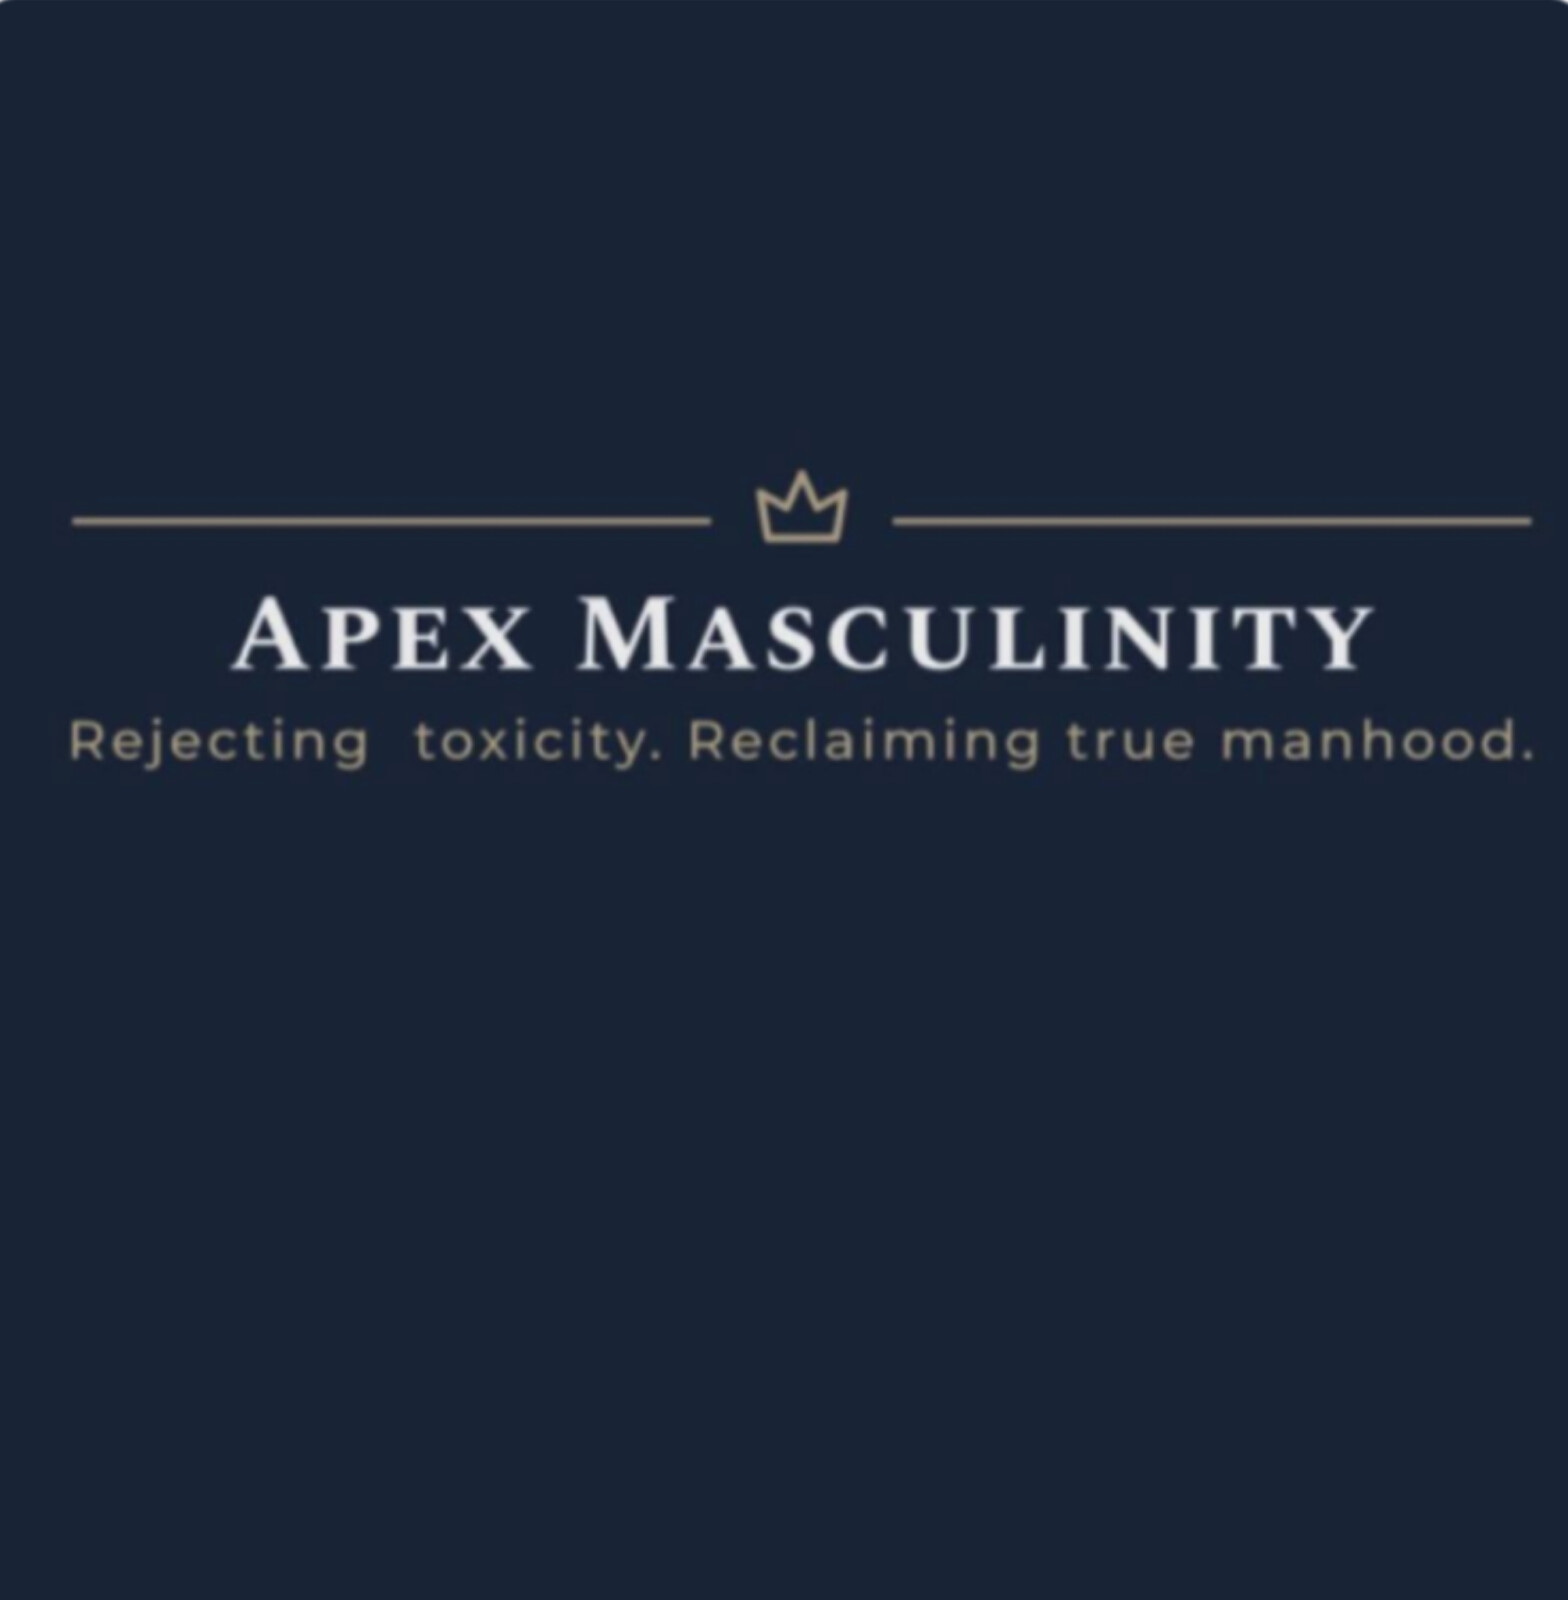 Guest Interview On Apex Masculinity Podcast with Nick Chontos